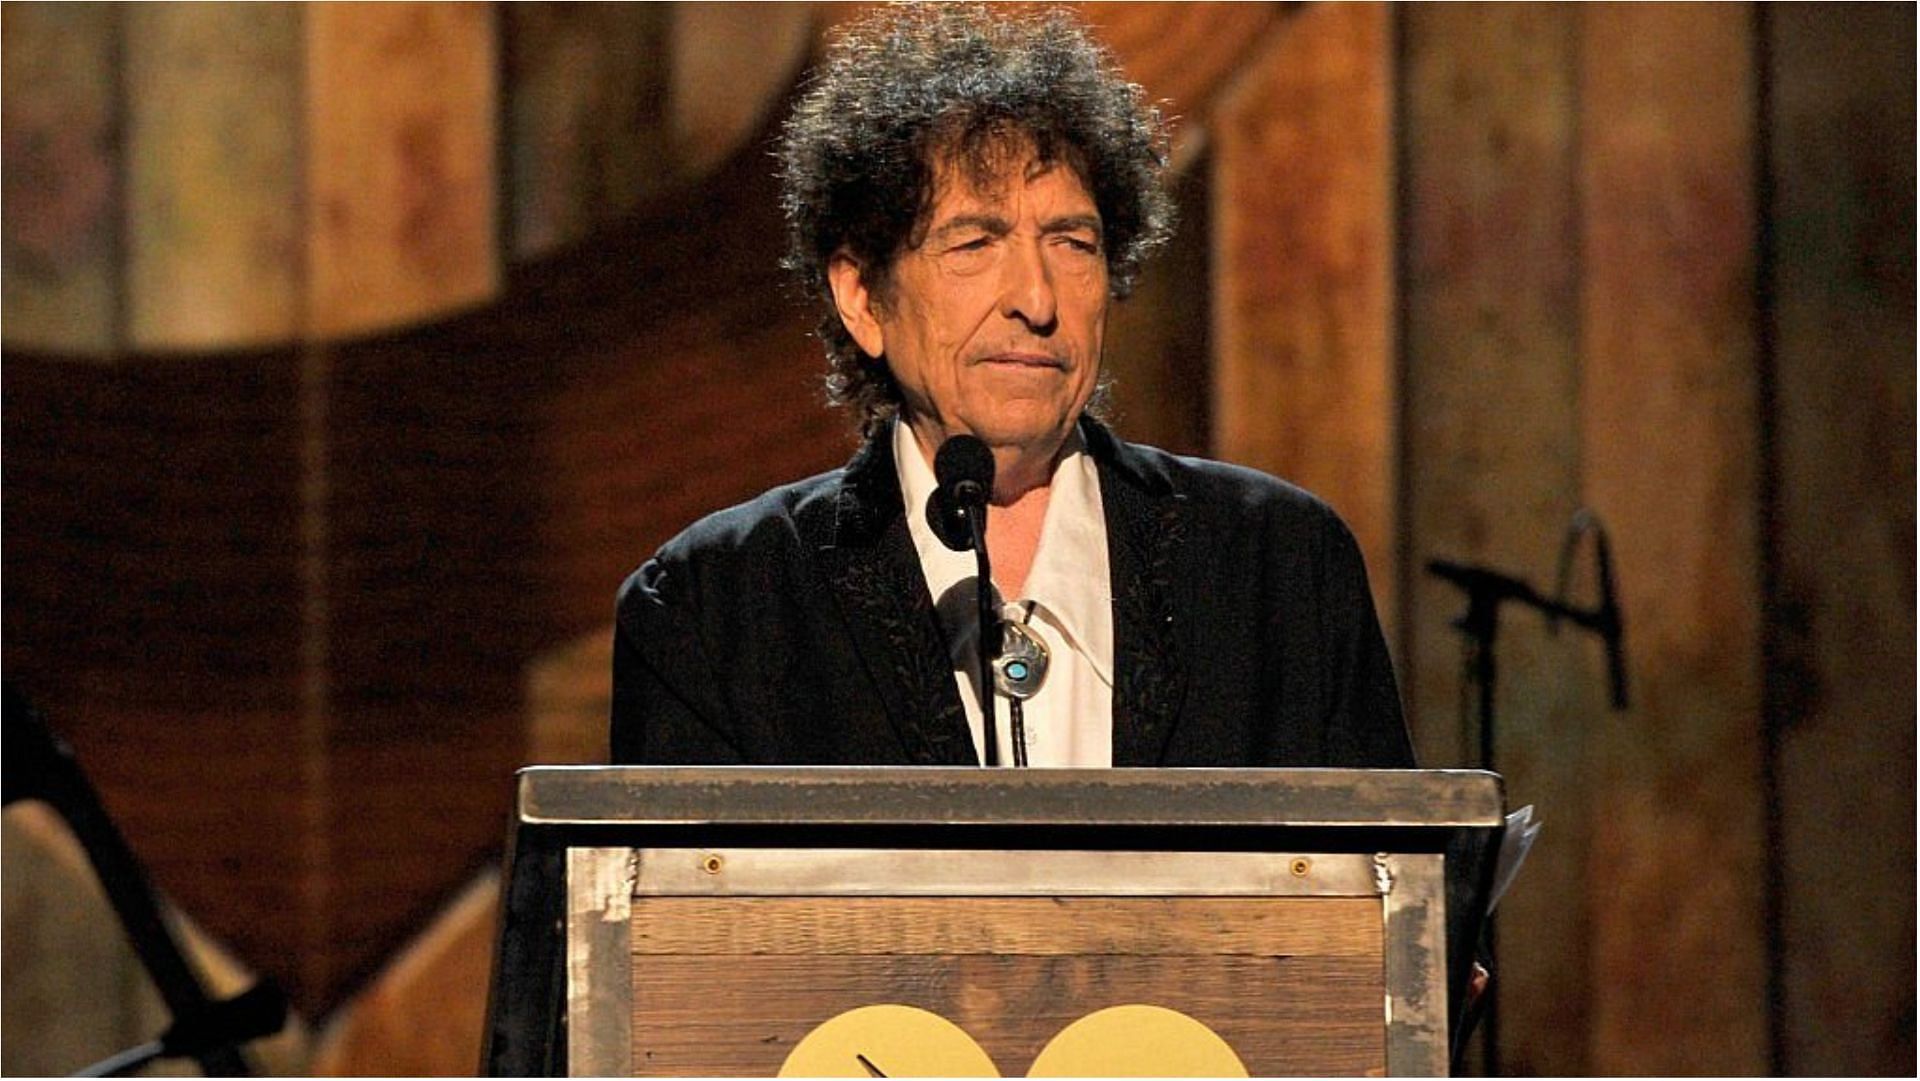 Bob Dylan&#039;s Desolation Row lyrics sheet also features his own changes (Image via Lester Cohen/Getty Images)